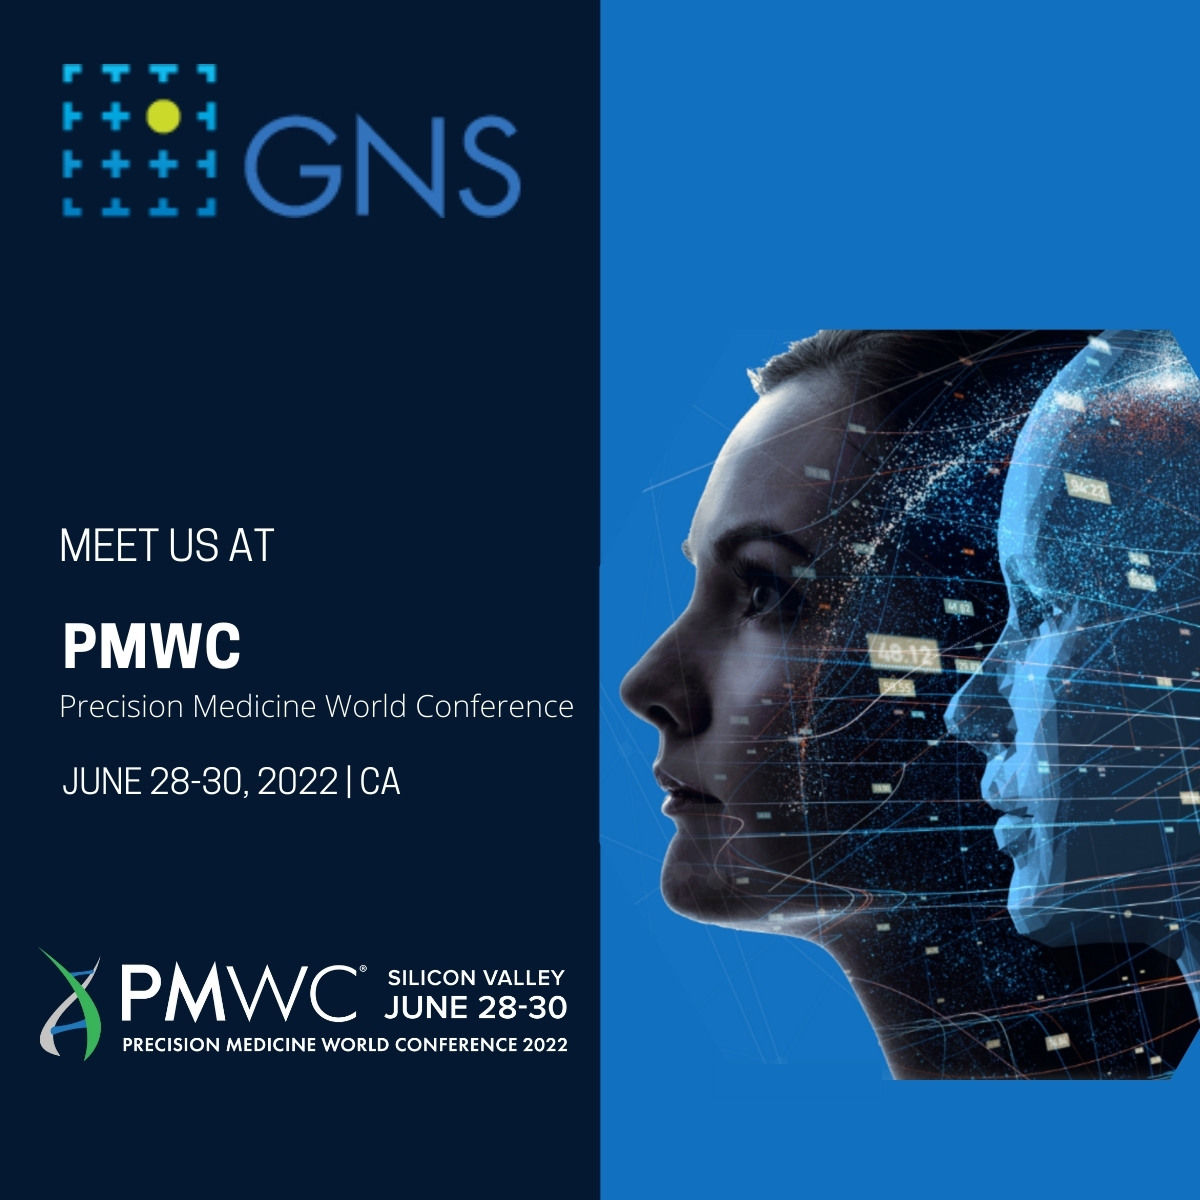 Meet us at Precision Medicine World Conference – PMWC